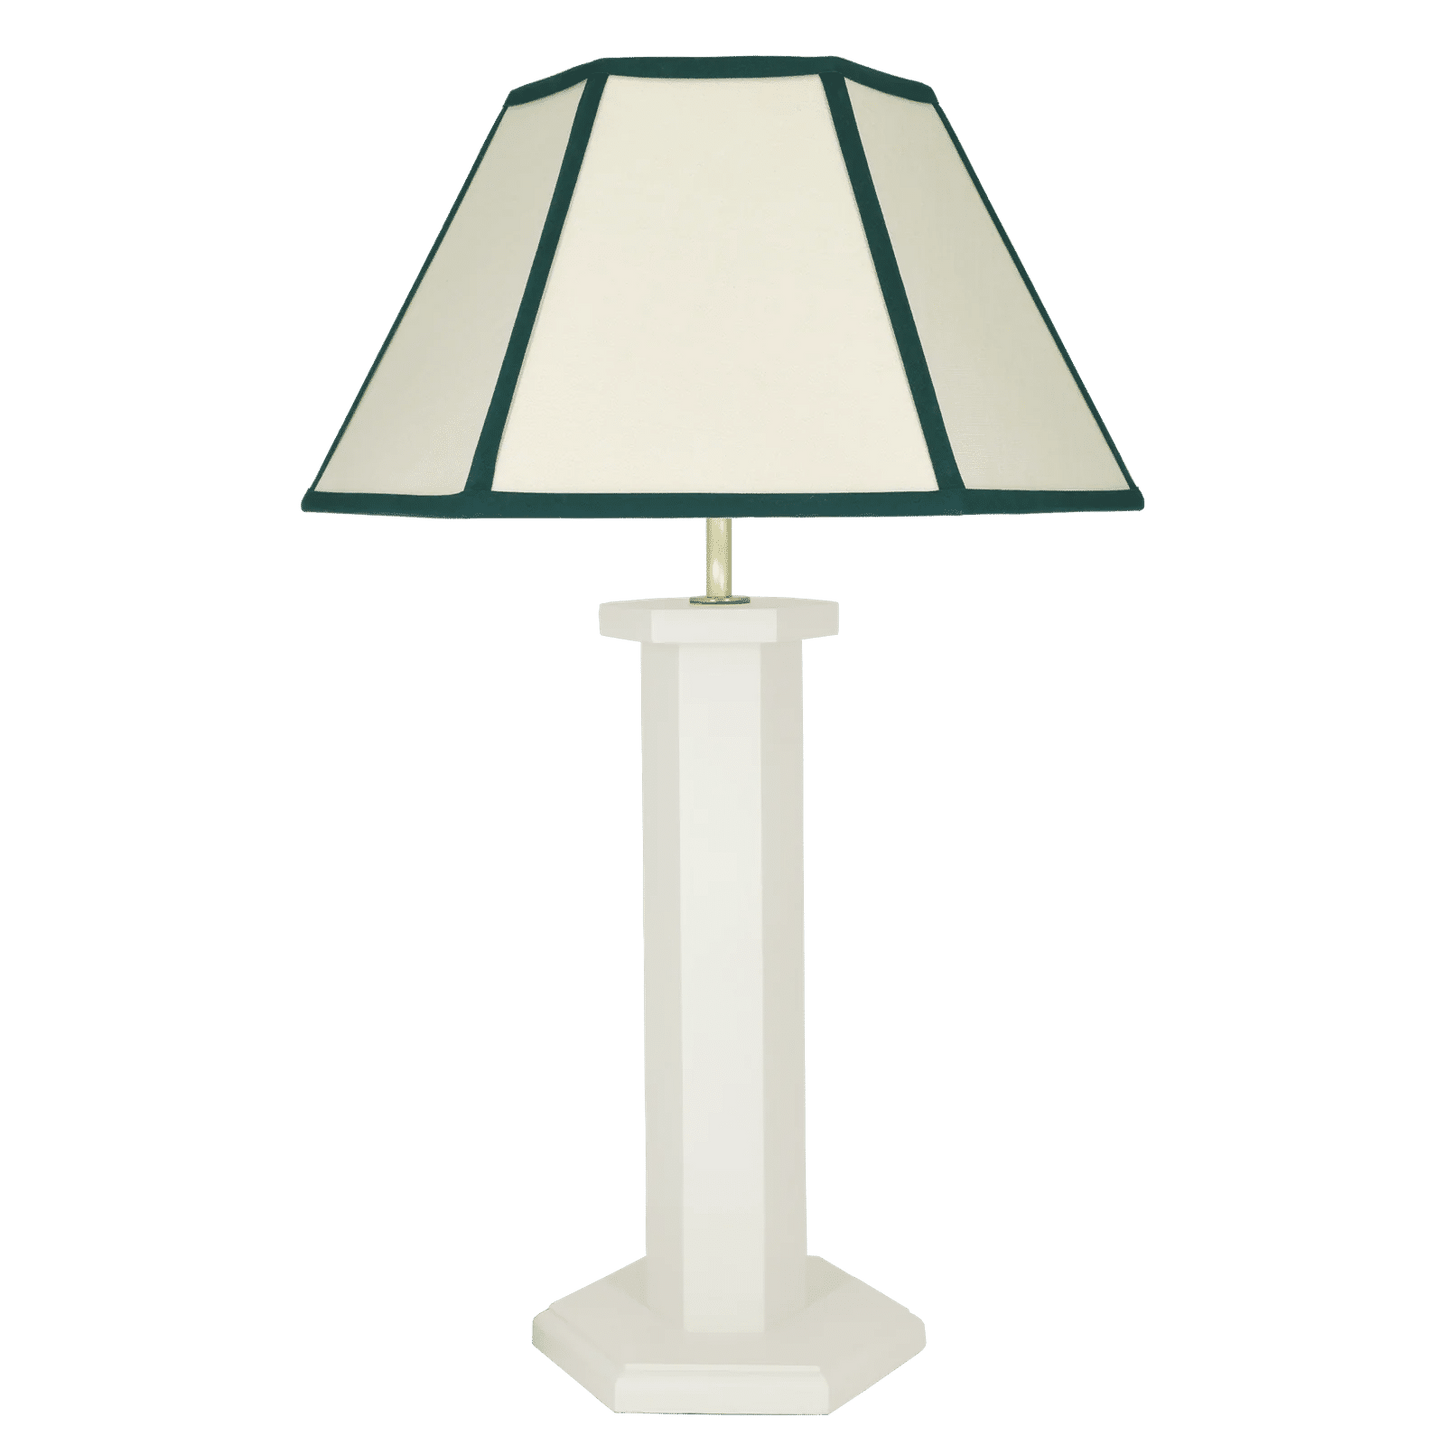 Hexagon Table Lamp - Oyster White